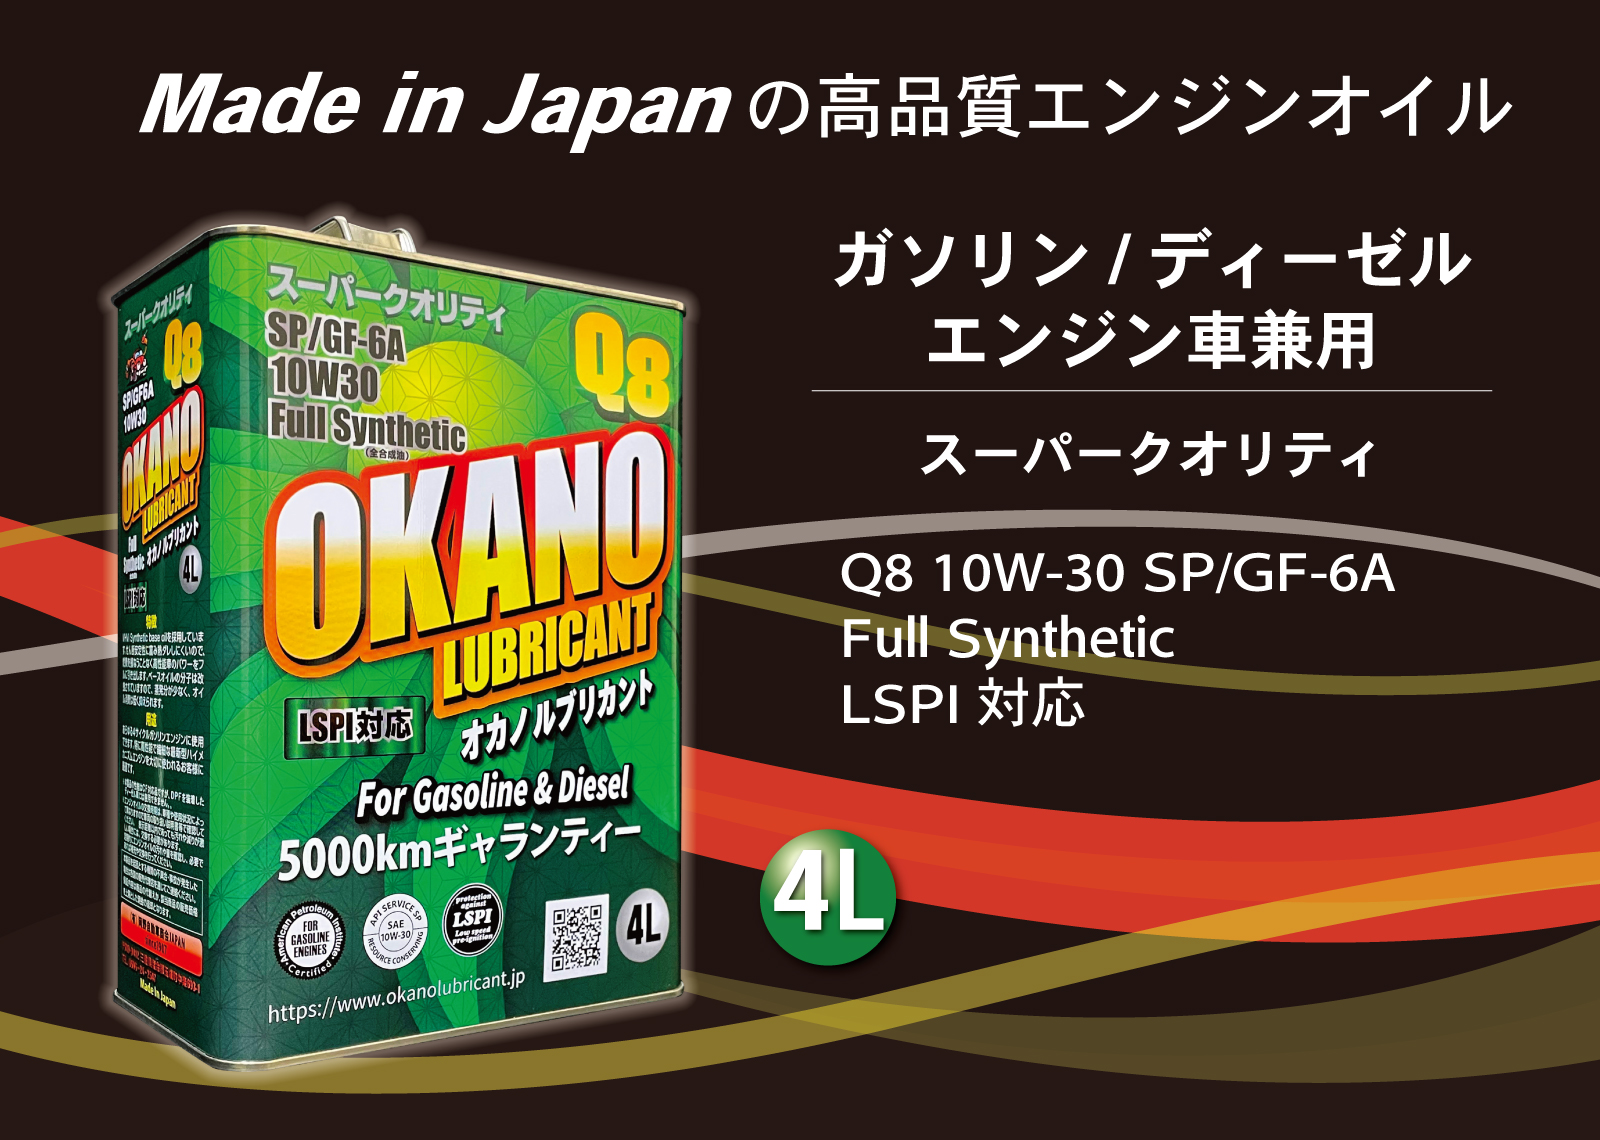 OKANO LUBRICANT Q8 10W-30 SP/GF-6A Full Synthetic LSPI